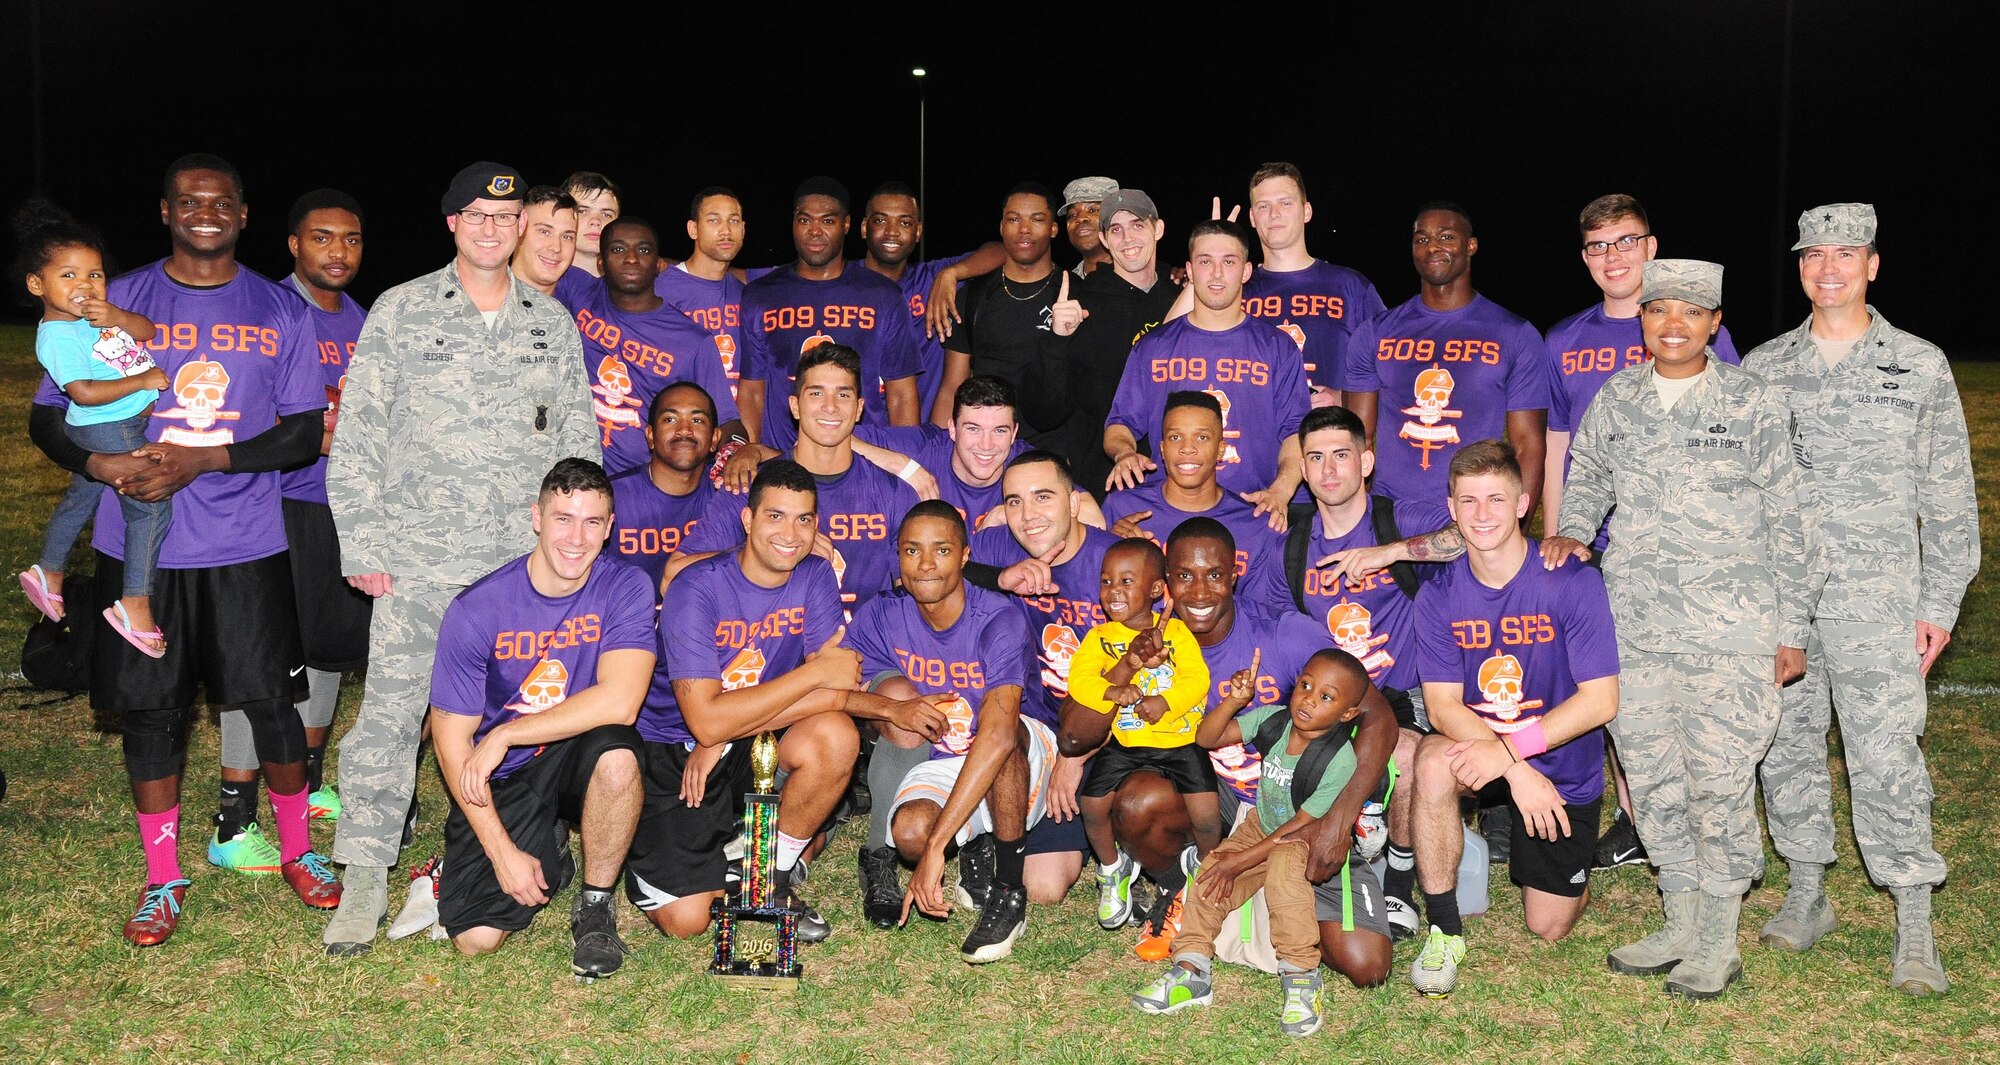 Members of the 509th Security Forces Squadron pose with the intramural flag-football championship trophy at Whiteman Air Force Base, Mo., Oct. 17, 2016. U.S. Air Force Brig. Gen. Paul W. Tibbets IV, the 509th Bomb Wing (BW) commander, and Chief Master Sgt. Melvina Smith, the 509th BW command chief, presented the team with the trophy. (U.S. Air Force photo by Senior Airman Joel Pfiester)